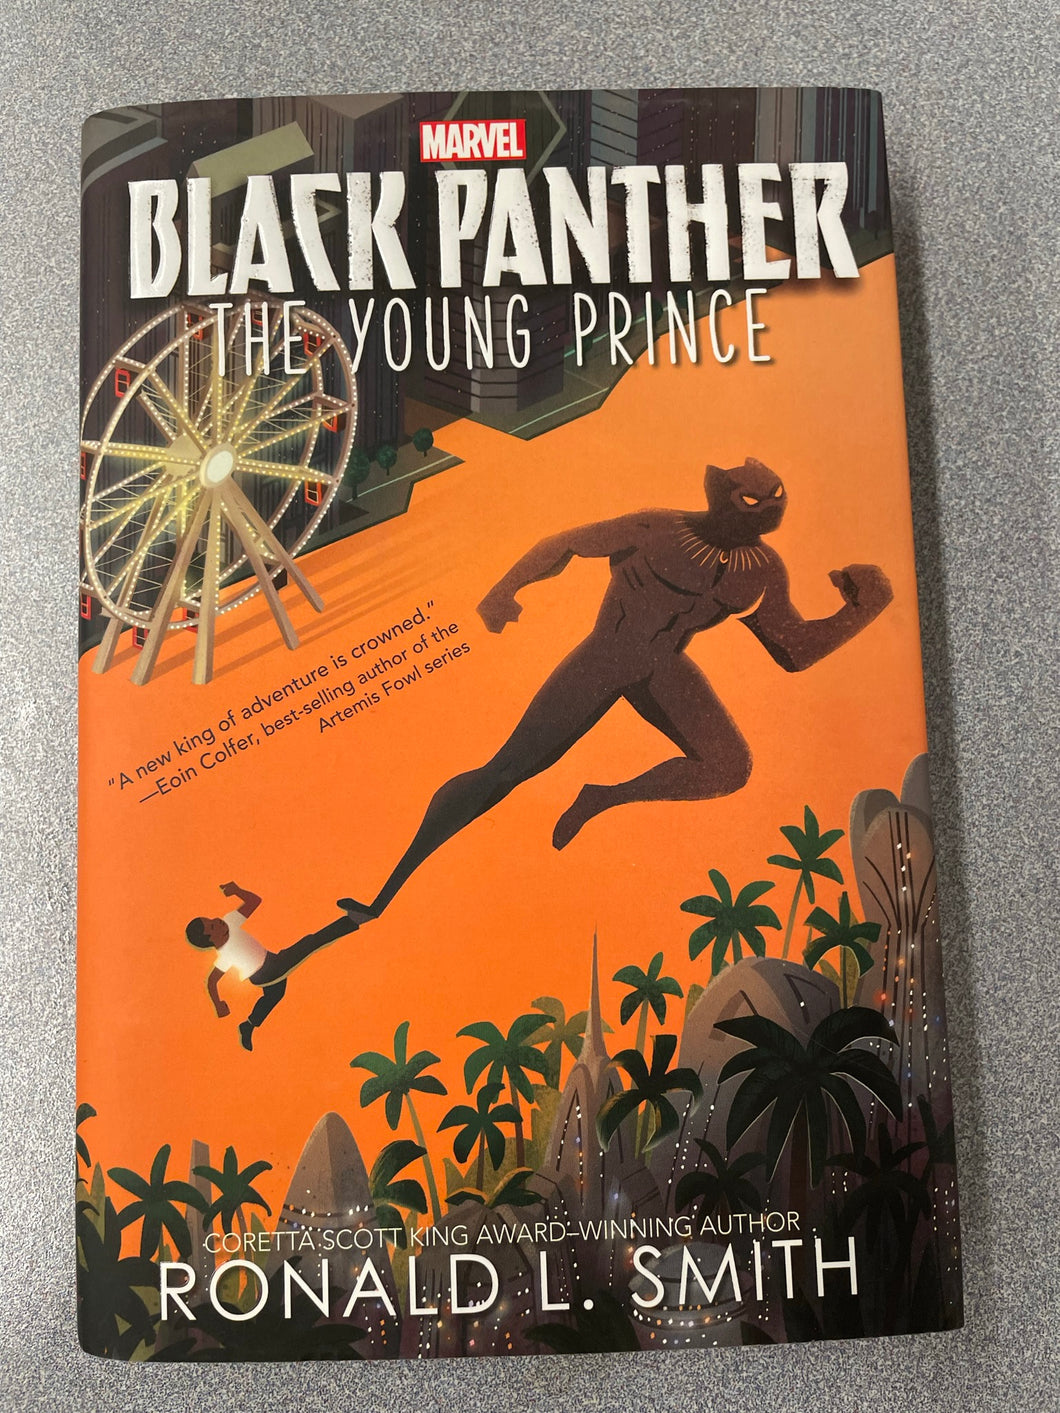 Smith, Ronald L., Black Panther: the Young Prince [2018] YF 1/23